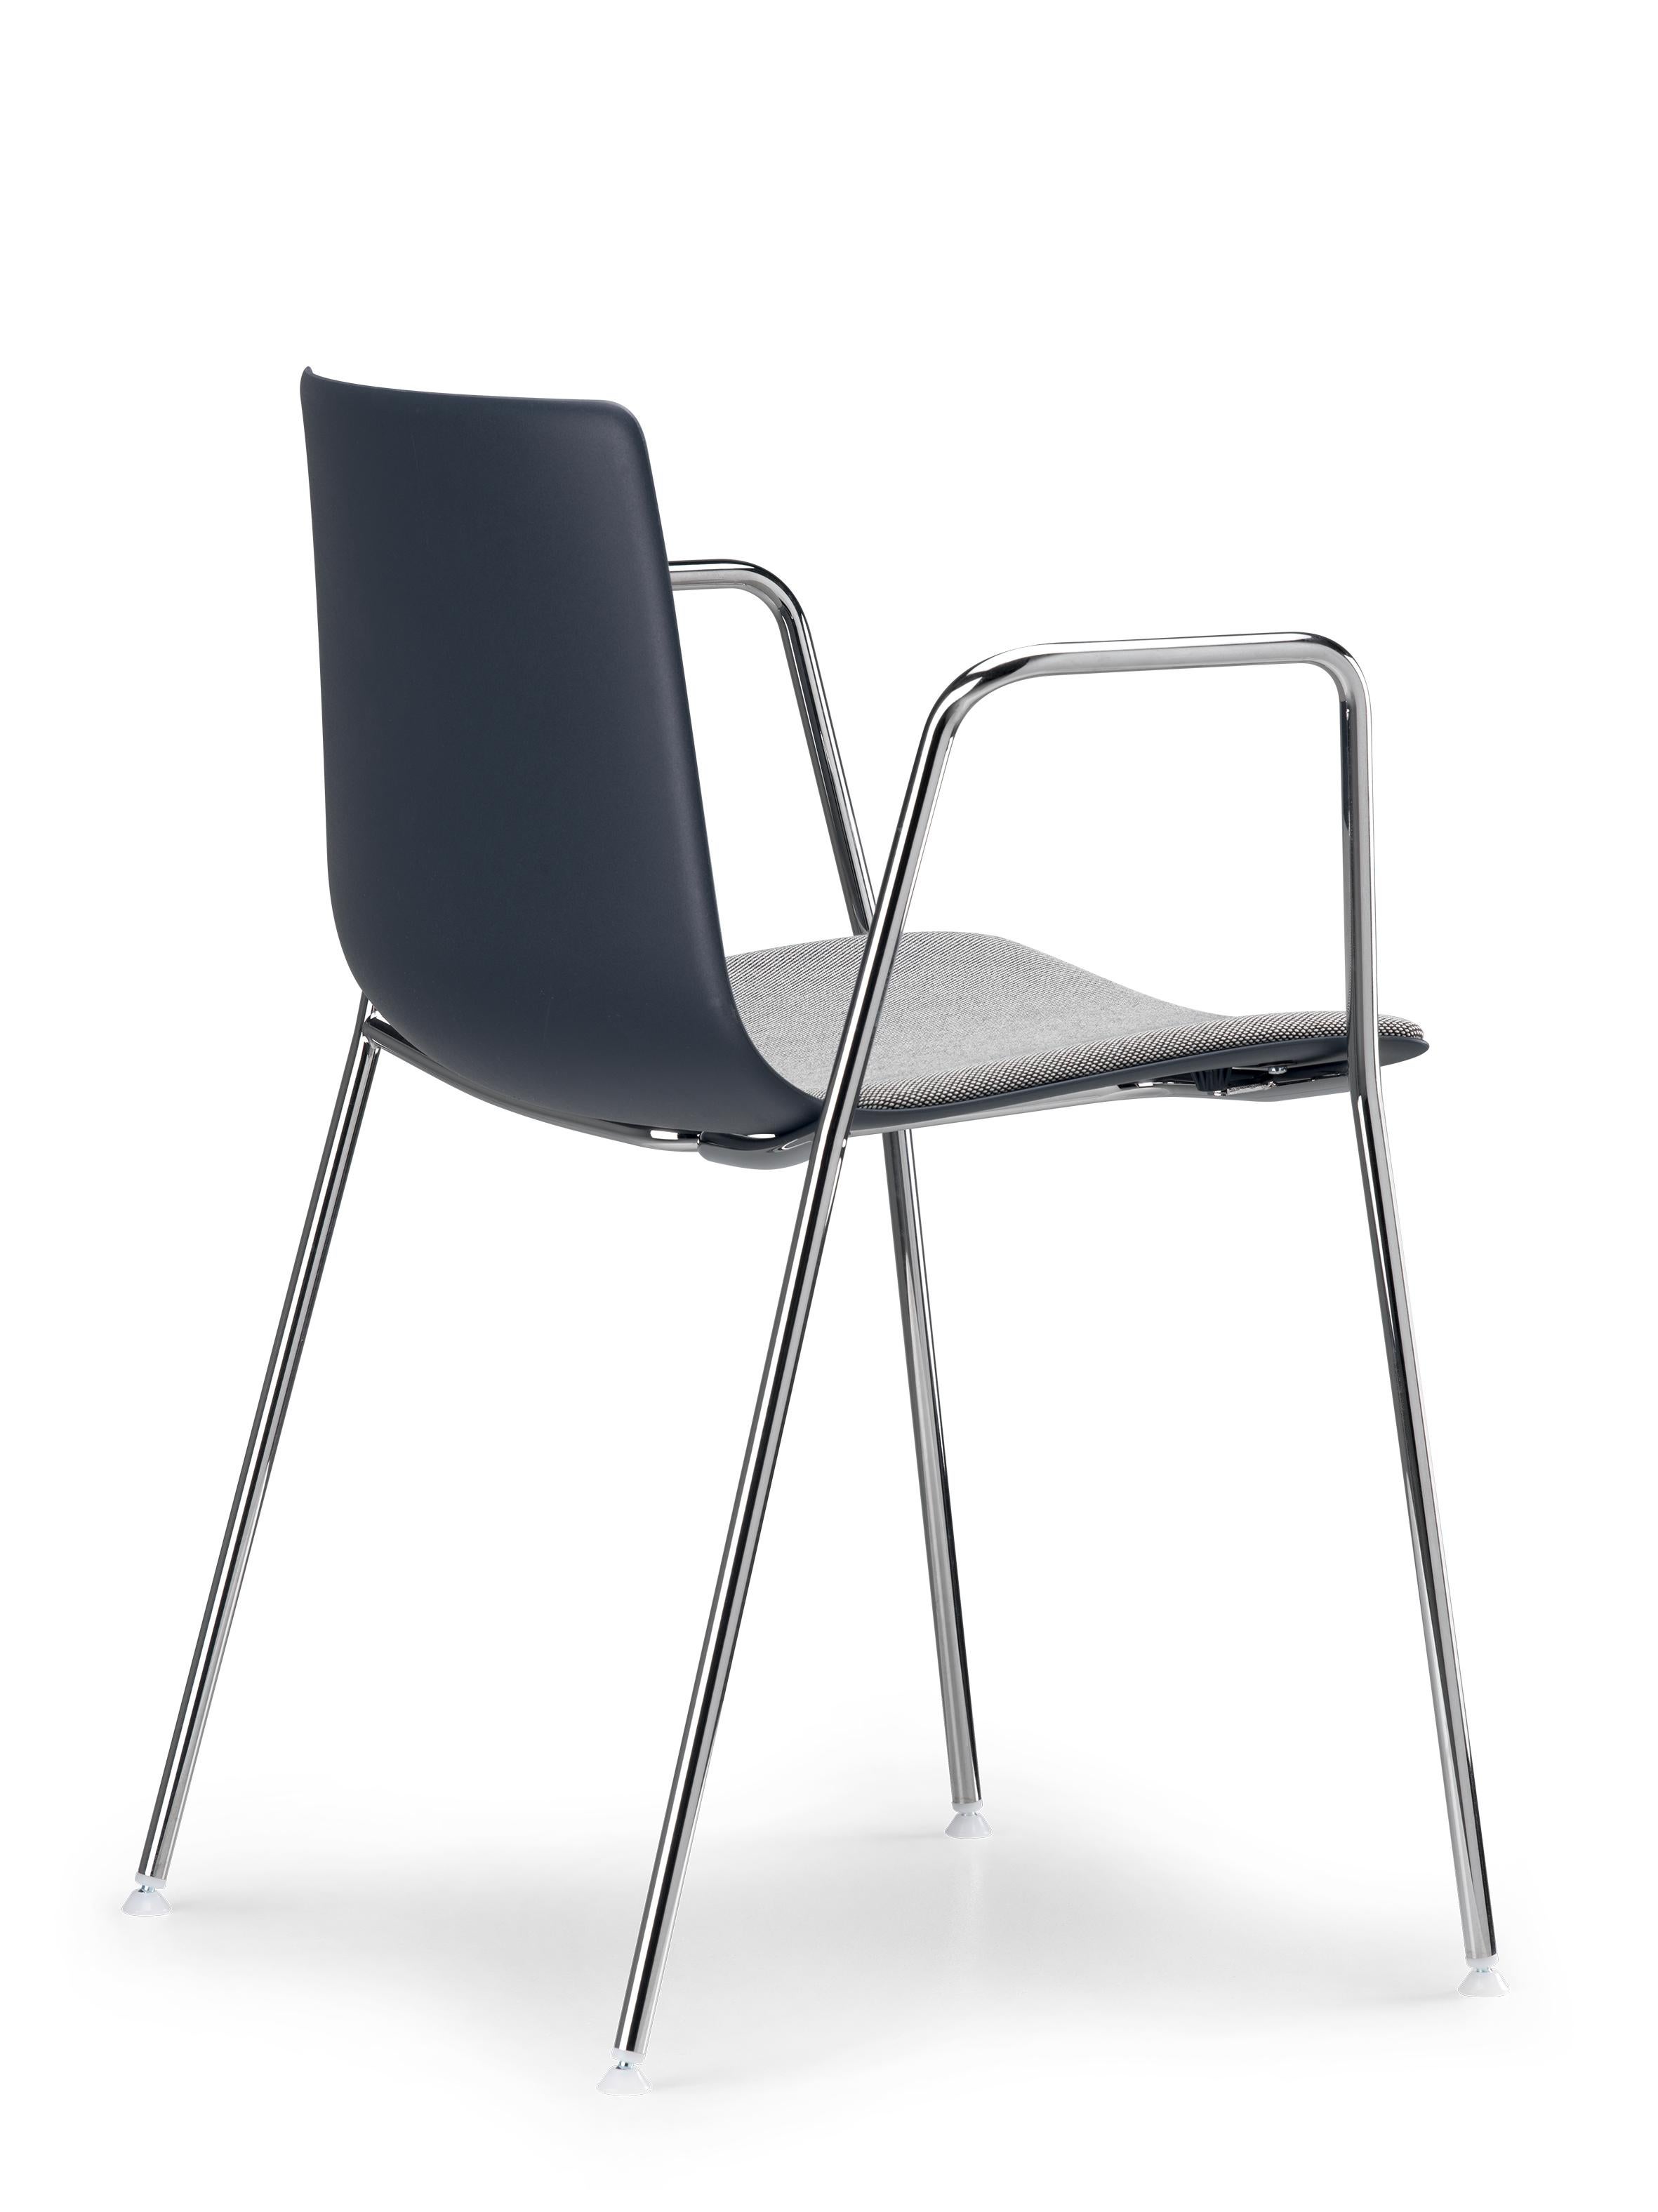 Alias 89D Slim Chair 4 Arm Soft S in Grey Upholstered Seat w Chromed Steel Frame by PearsonLloyd

Chair with structure and arms in lacquered or chromed steel (stackable version on request). Shell in monochromatic polypropylene with cushion fixed